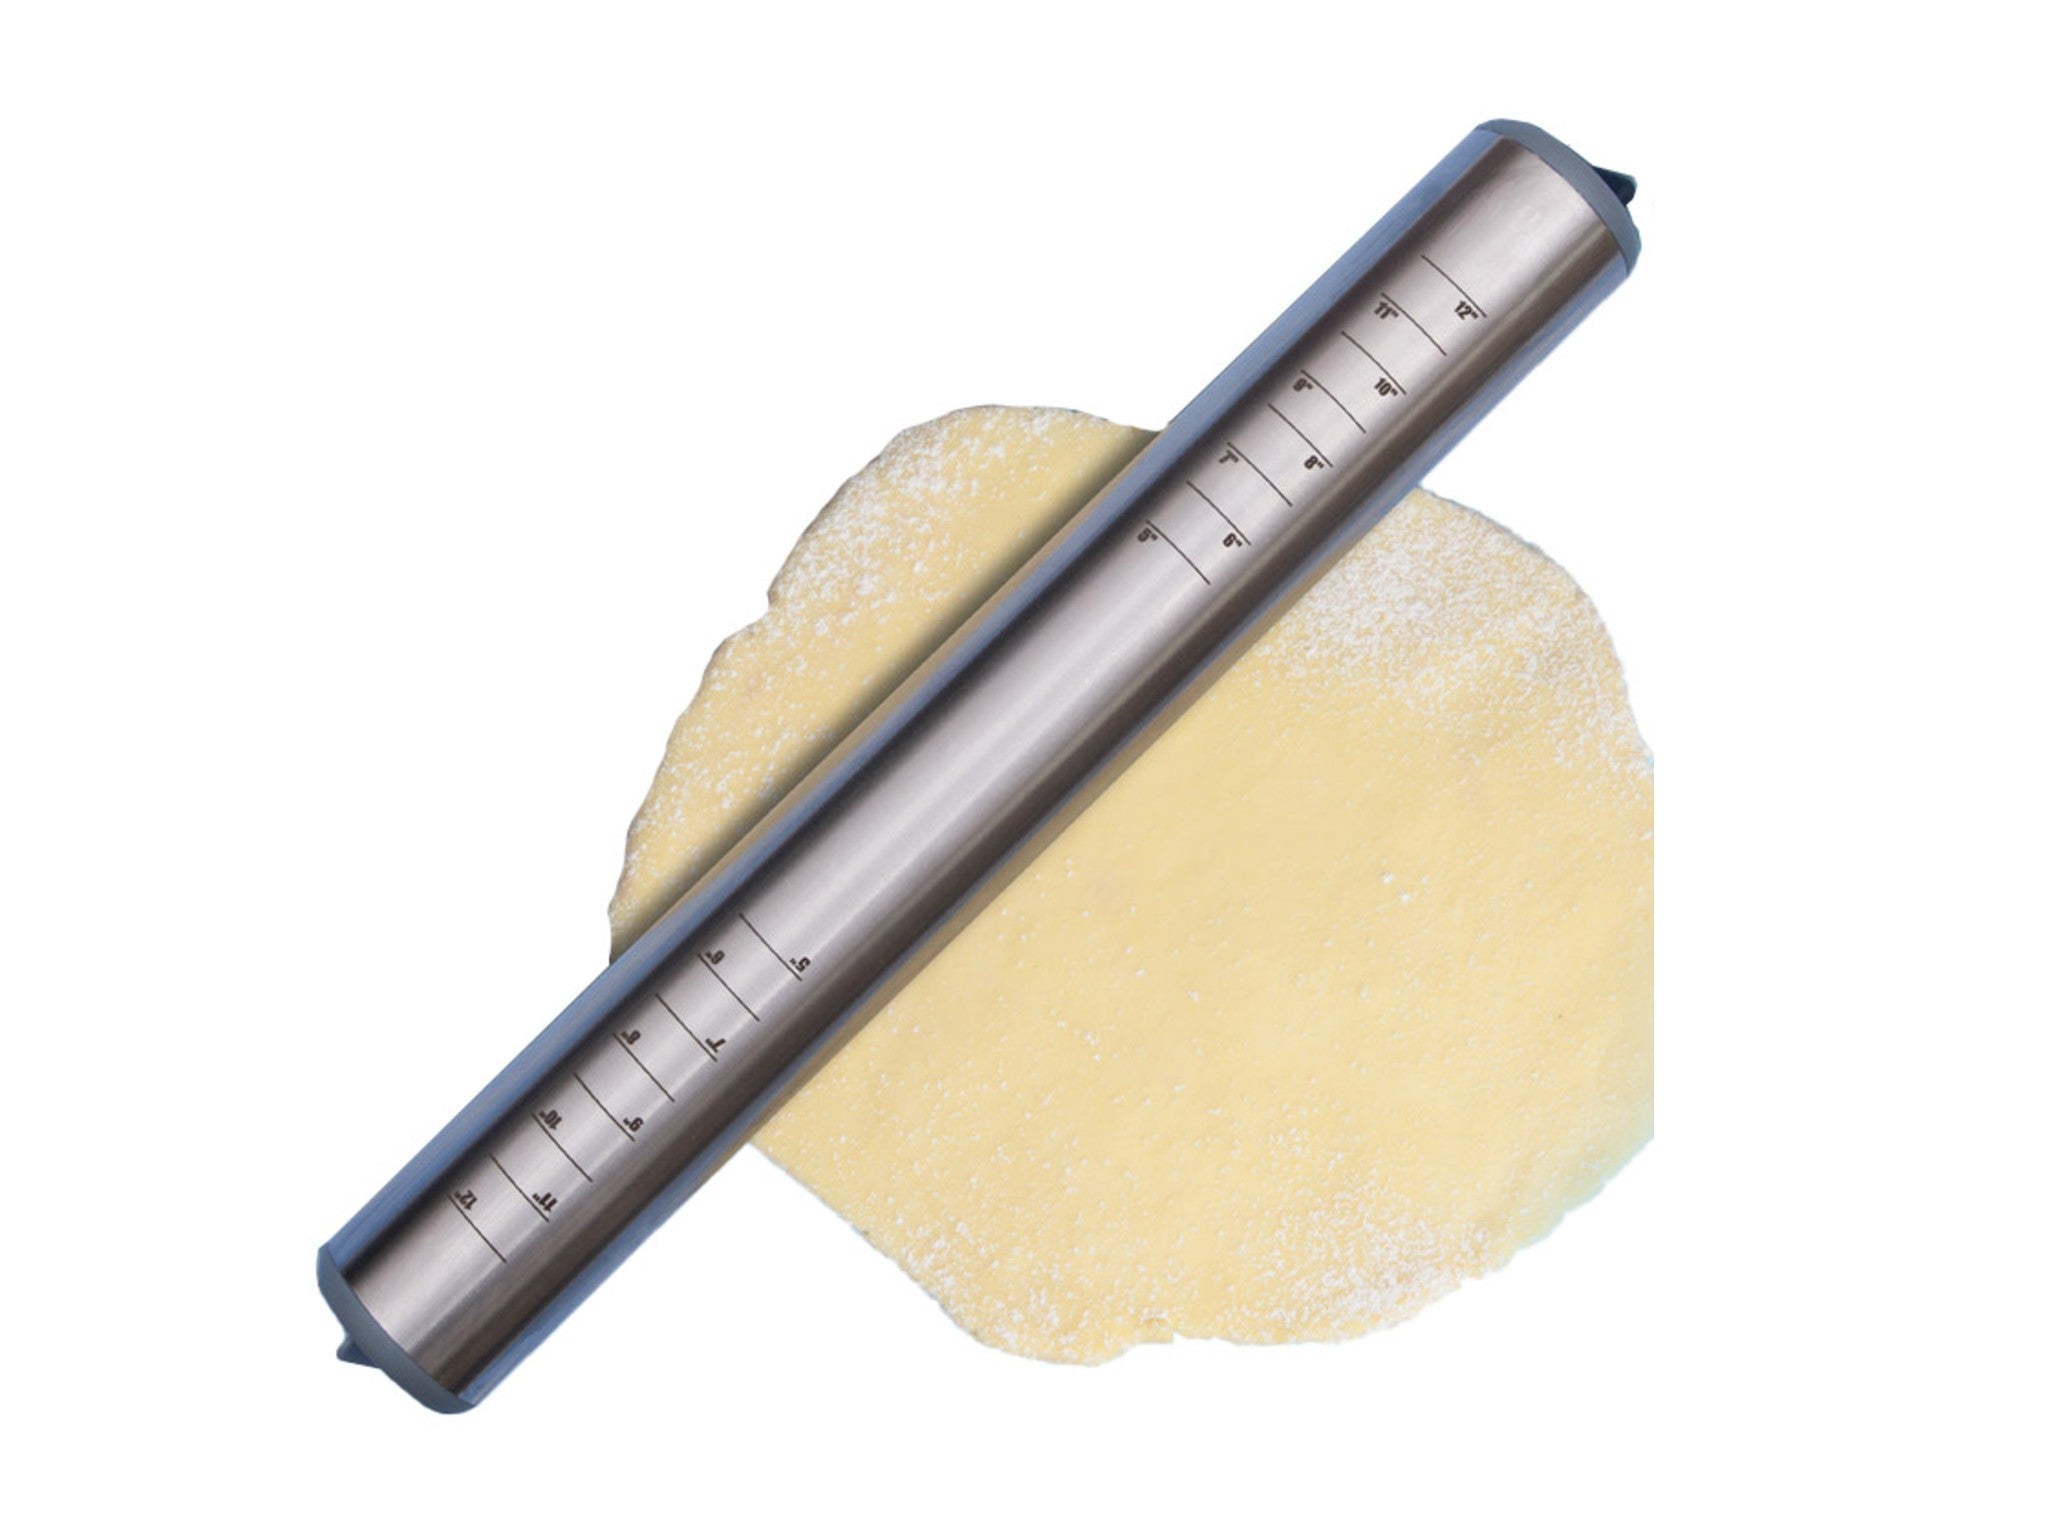 Lakeland cooling rolling pin indybest.jpeg